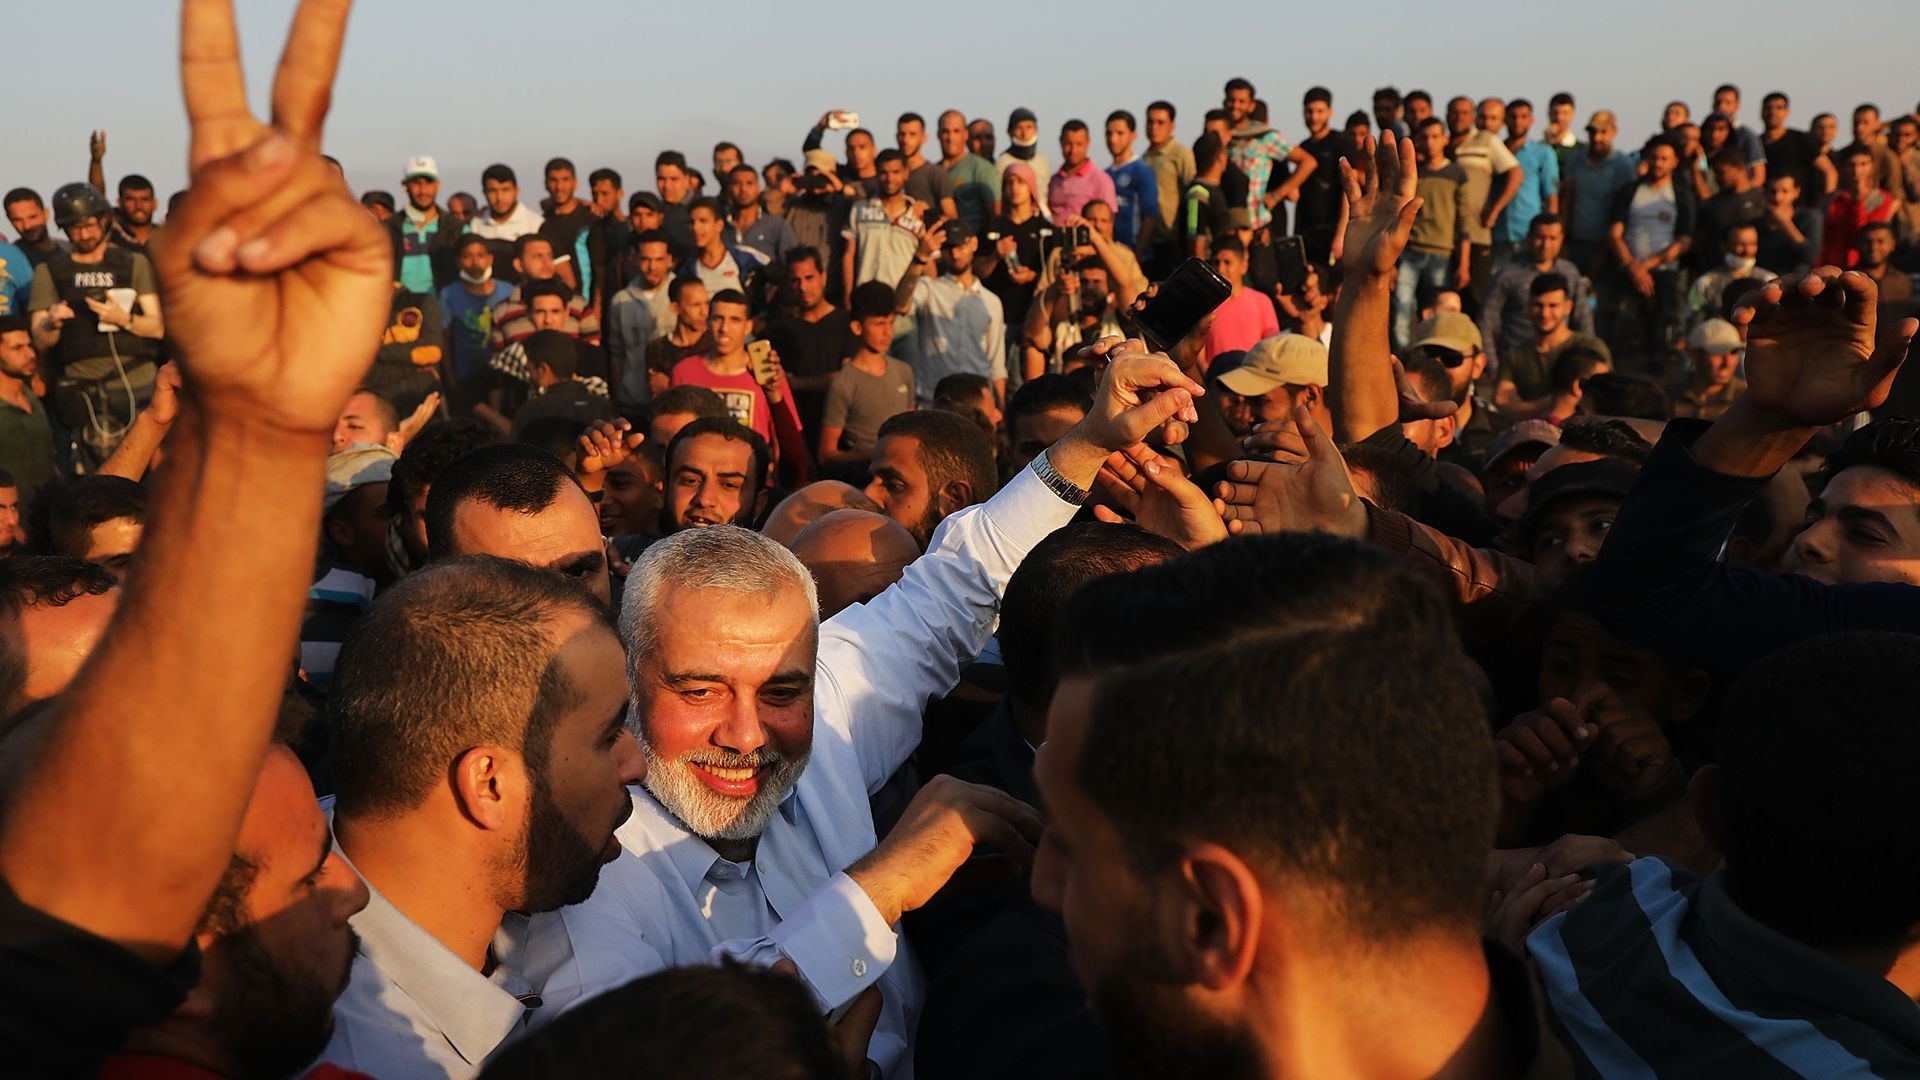 Hamas leader and people in the sun.